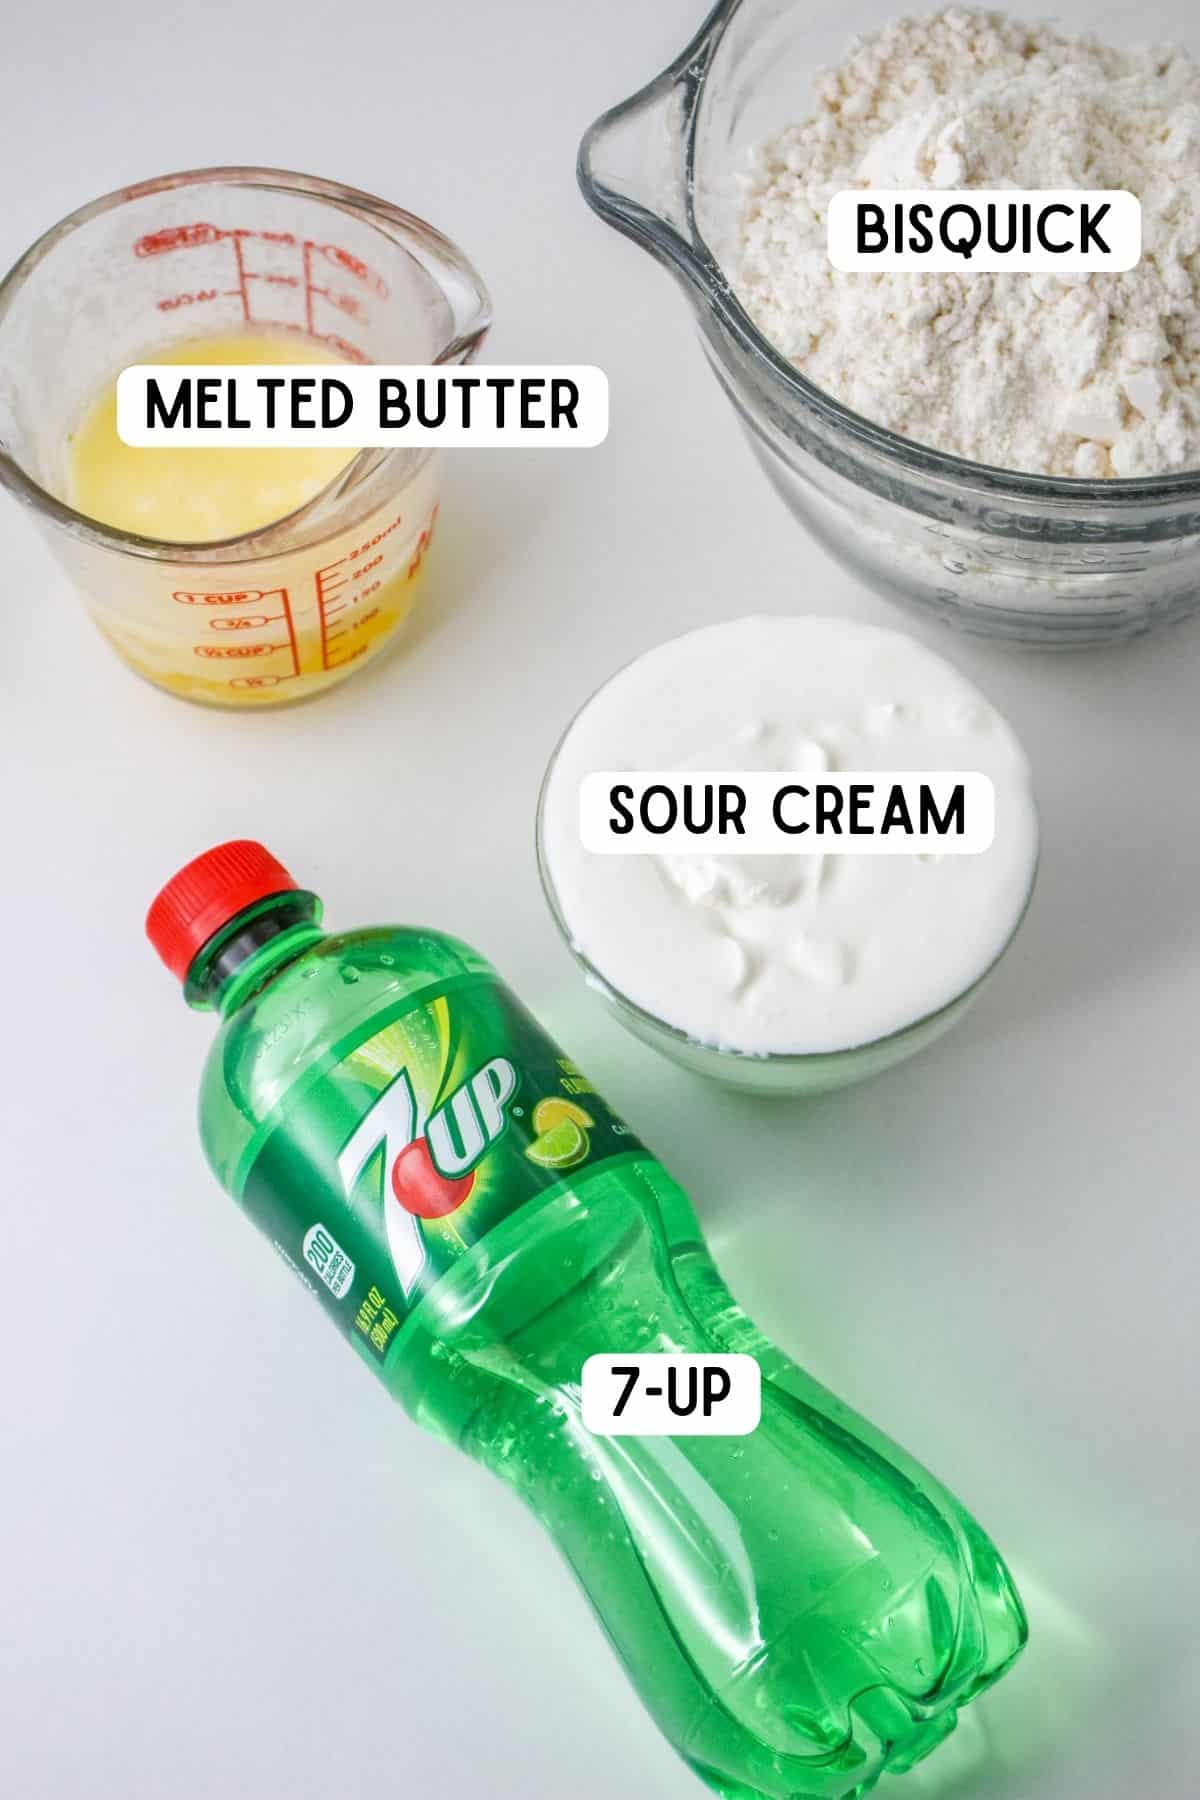 Melted butter, bisquick, 7 up soda bottle, and sour cream.